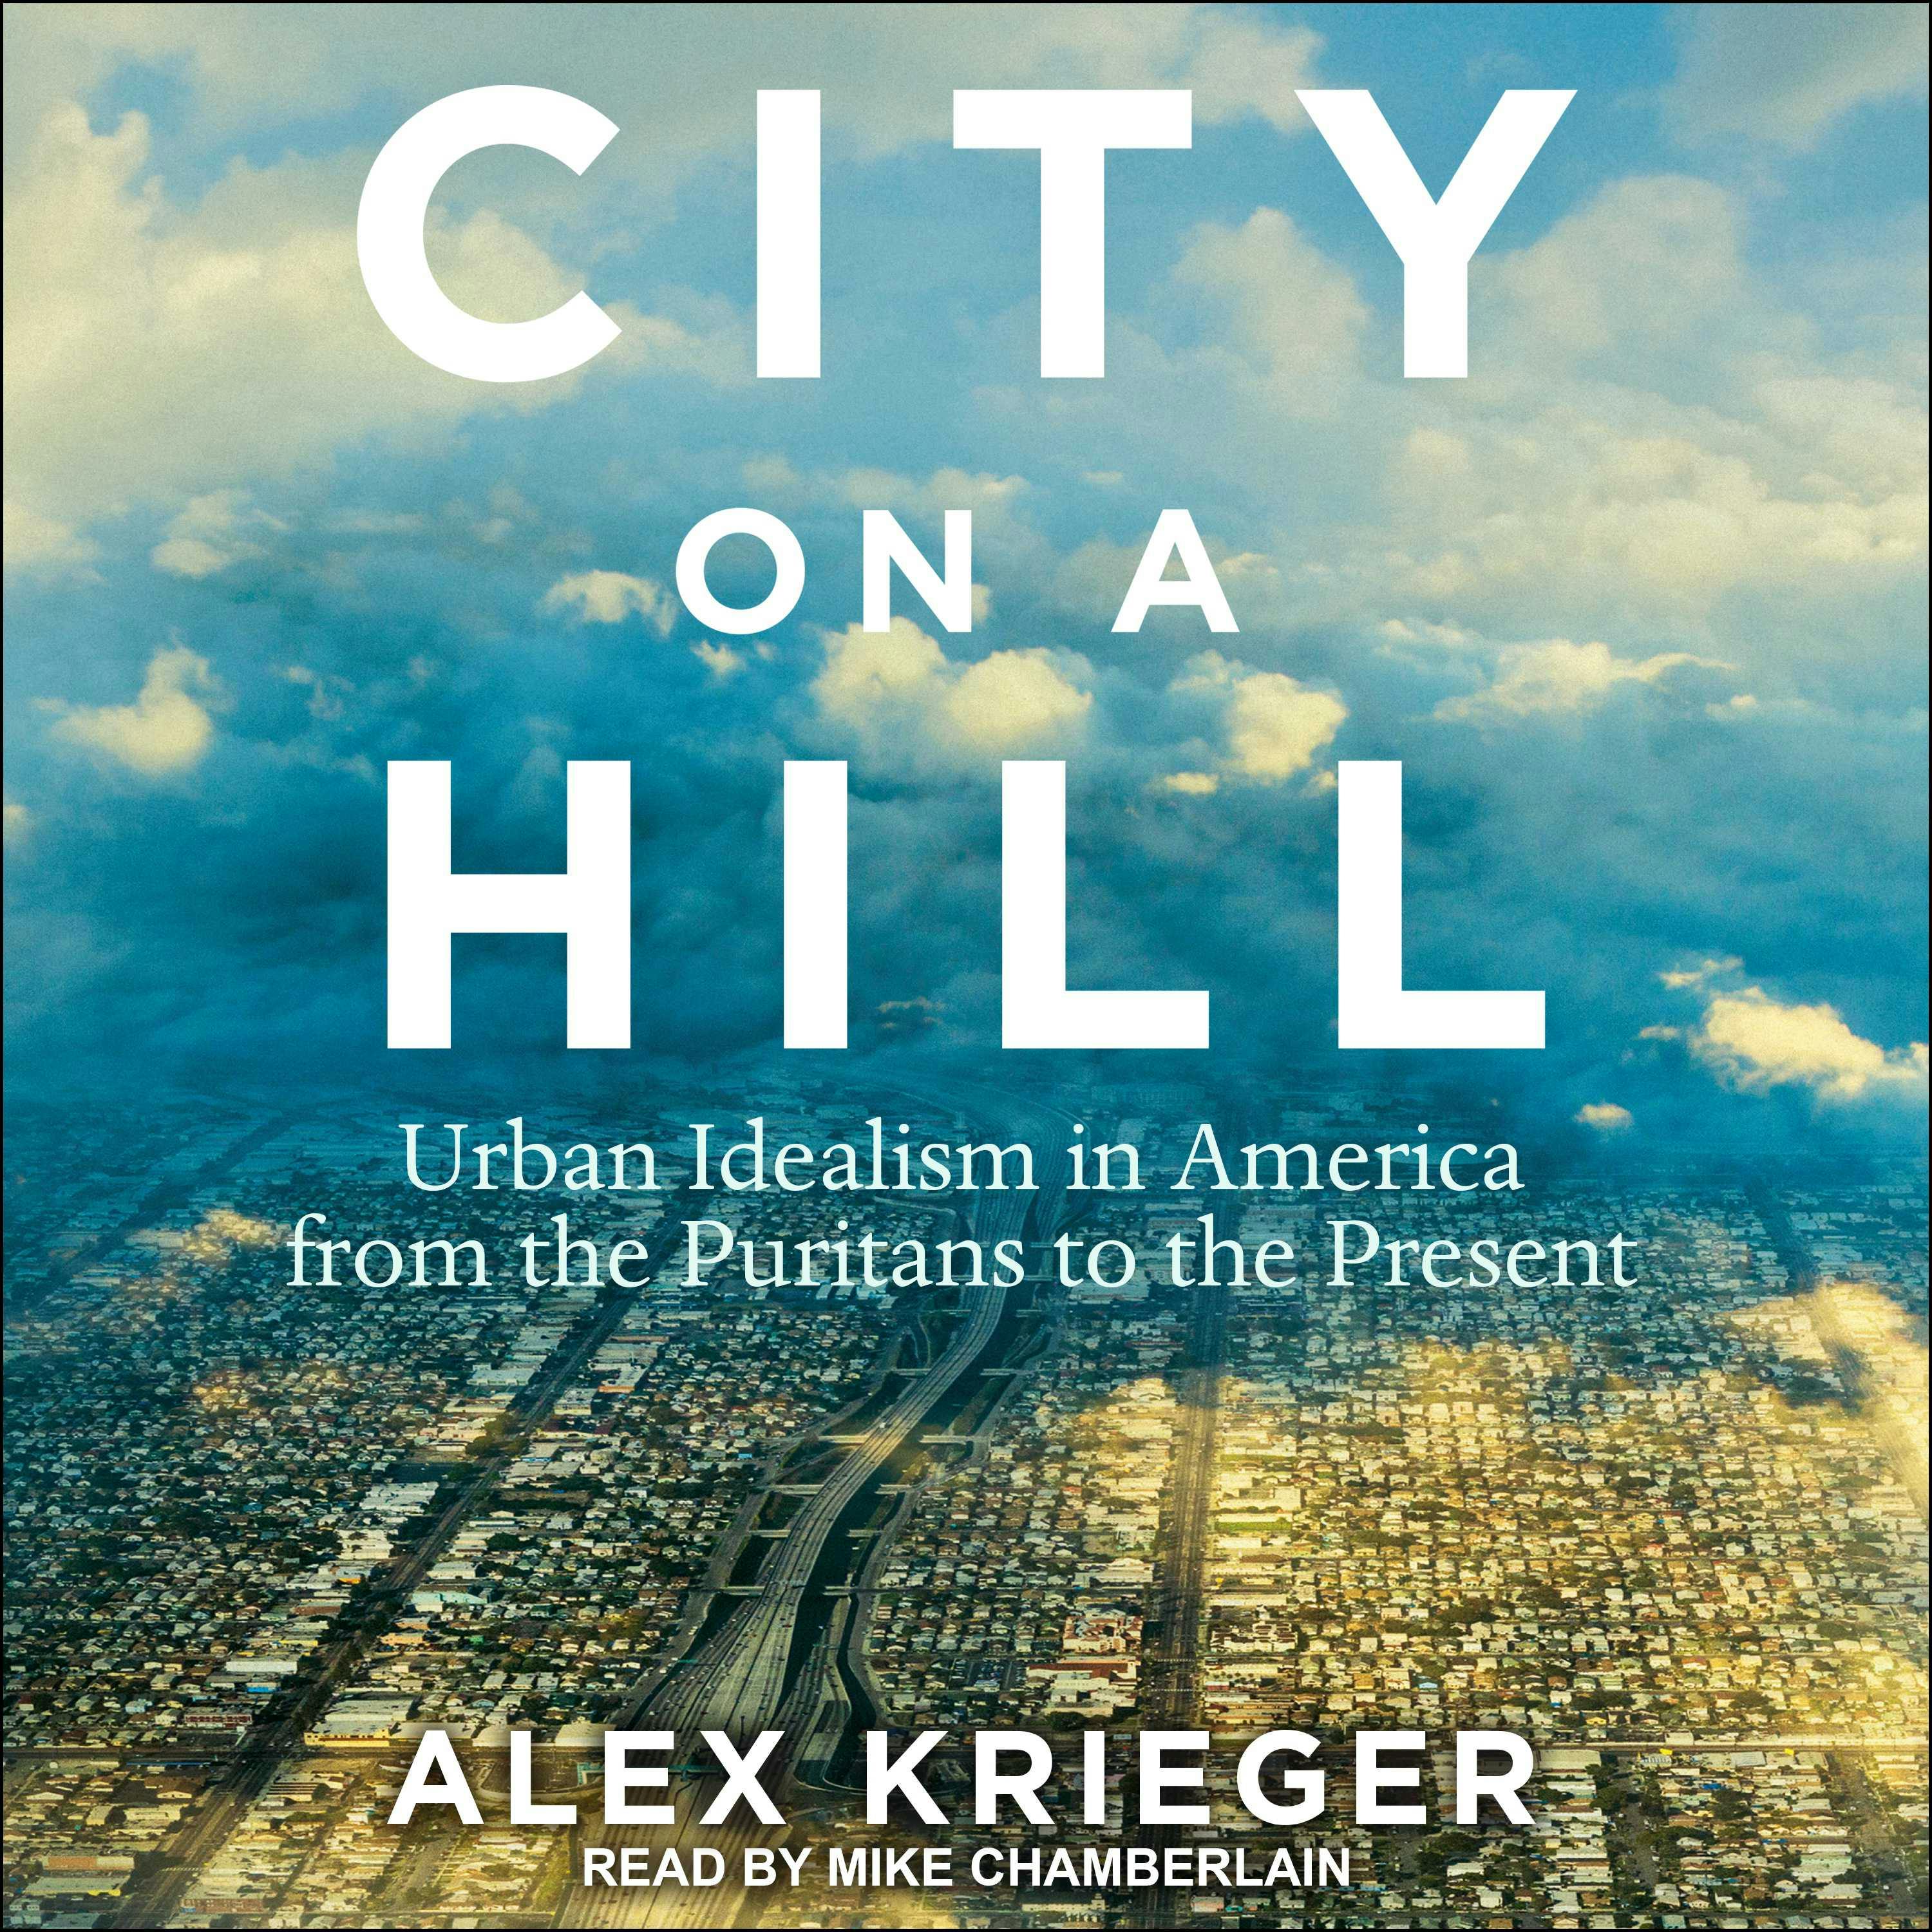 City on a Hill: Urban Idealism in America from the Puritans to the Present - Alex Krieger